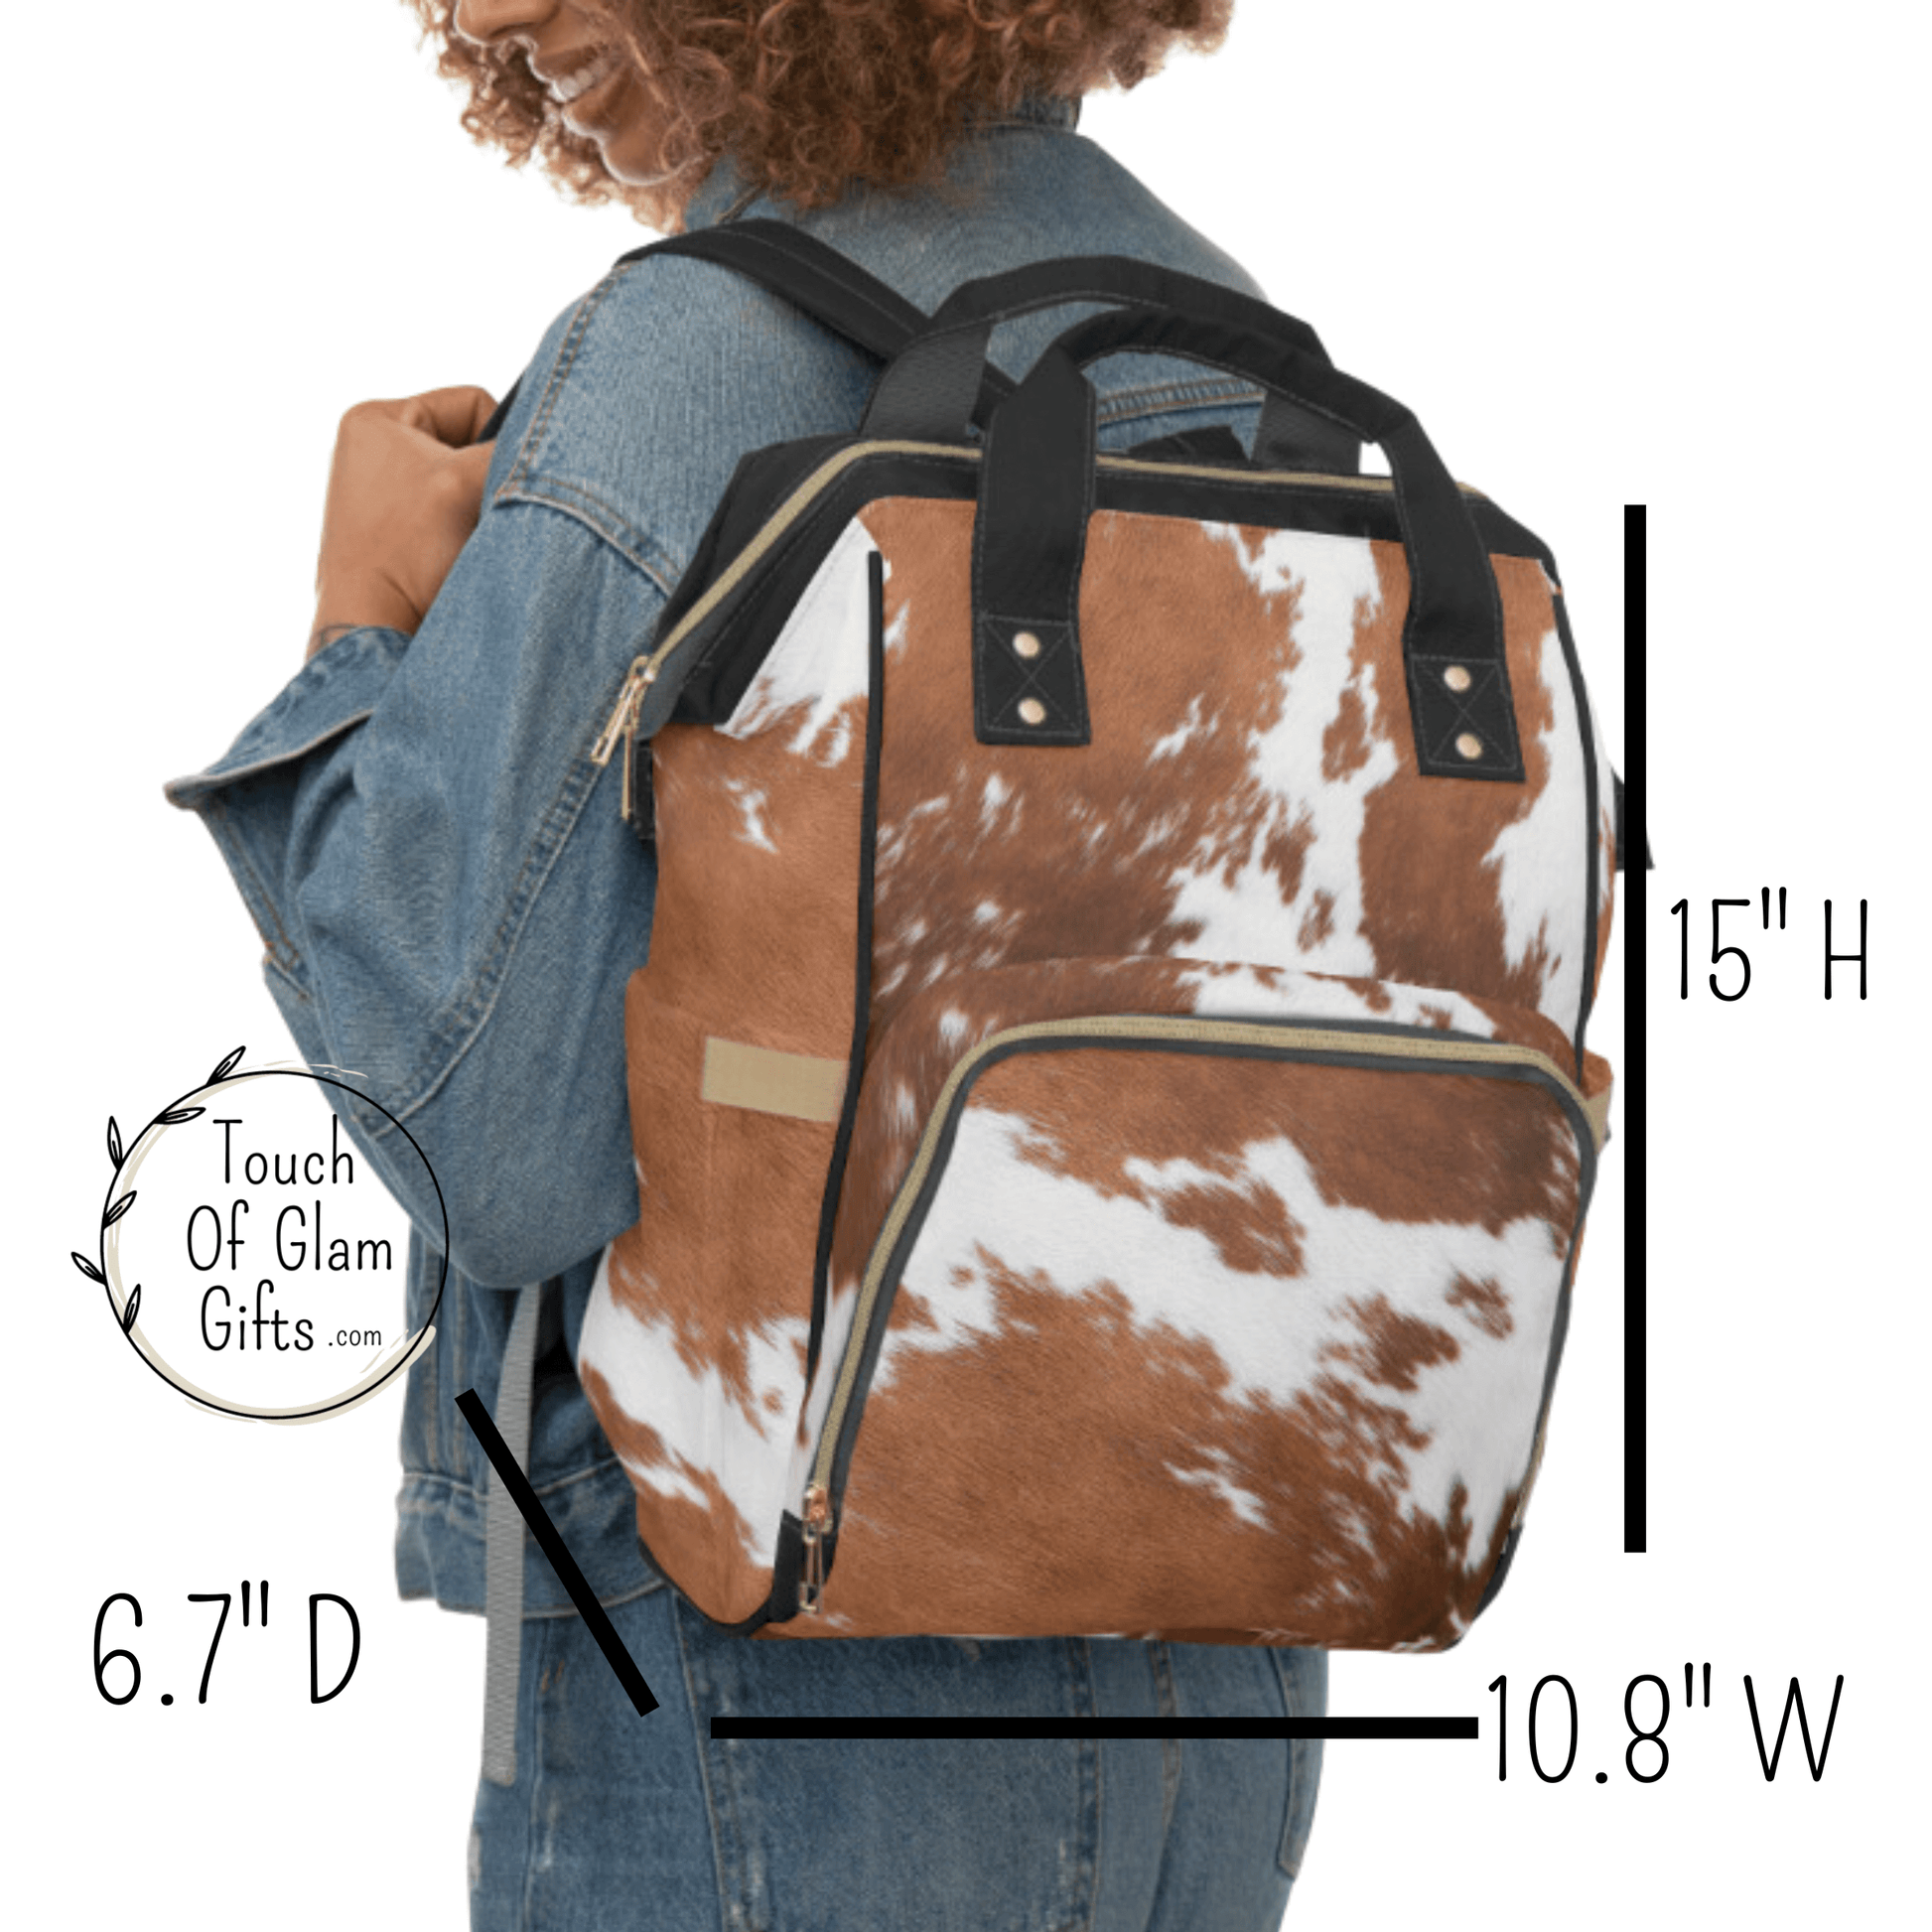 We show the measurements of the plain backpack with height fifteen inches, width ten point eight inches and depth six point seven inches.